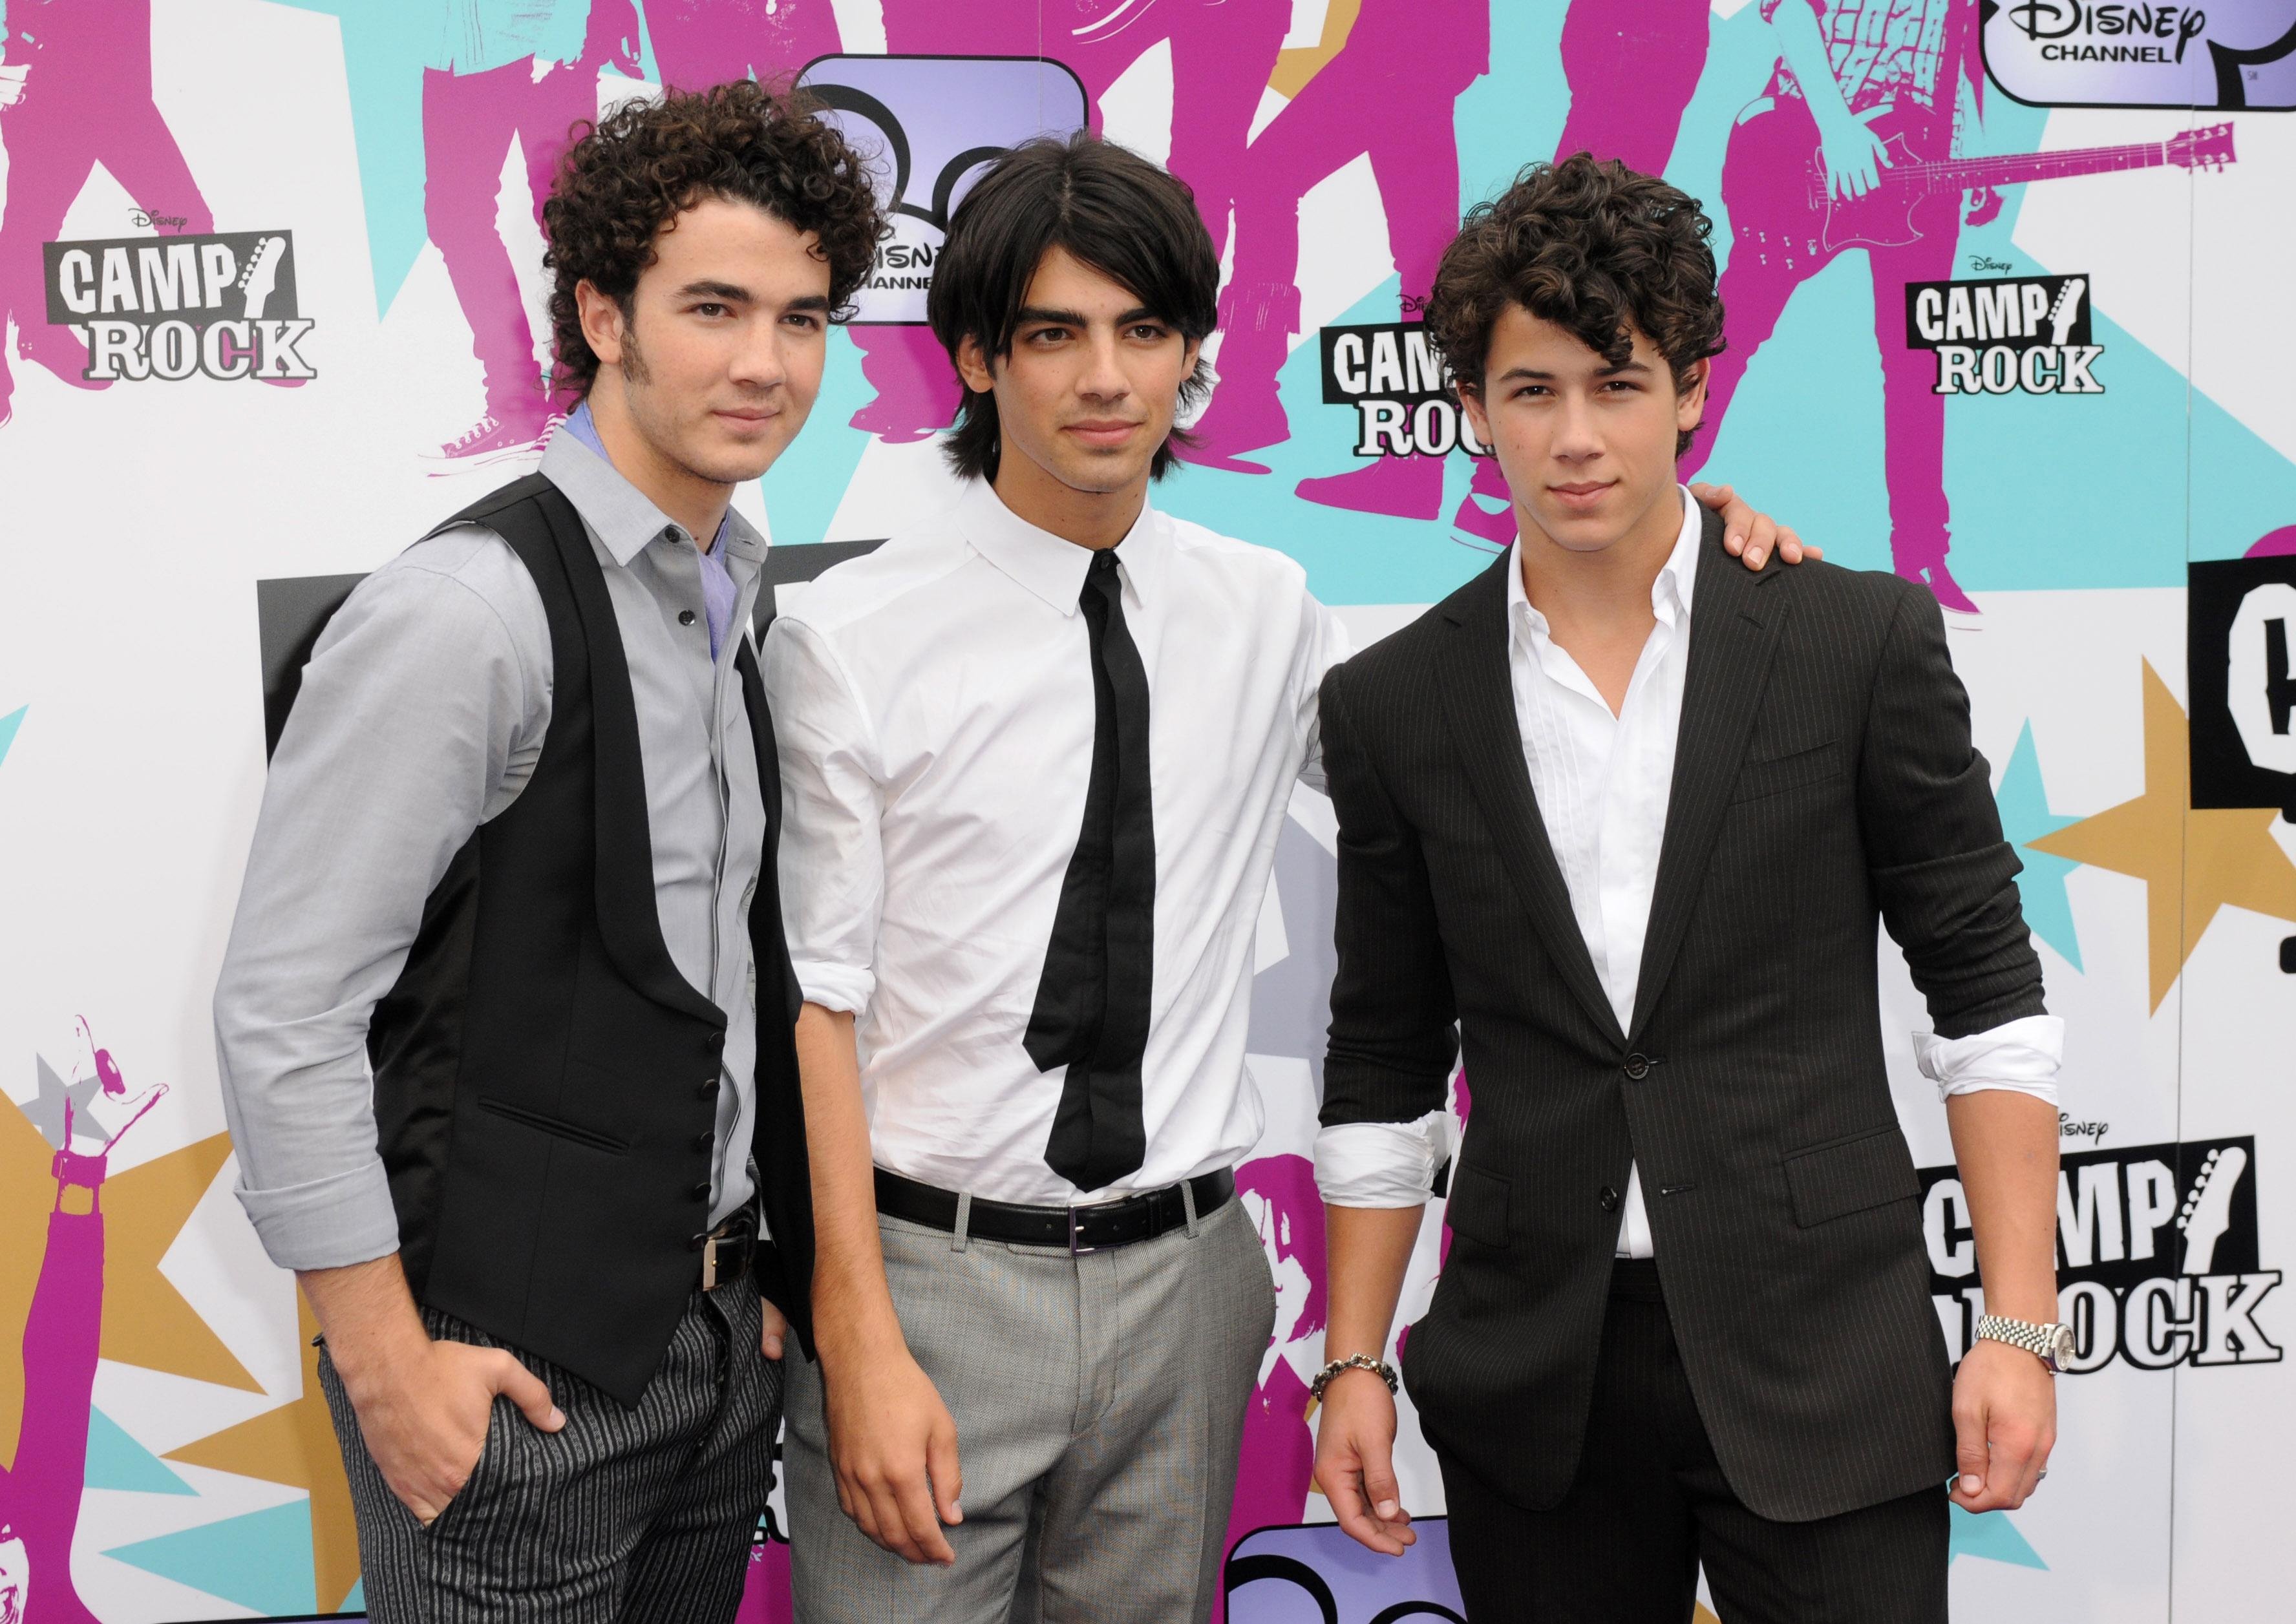 The Jonas Brothers (from left to right) Kevin, Joe and Nick arrive for the Disney Channel European premiere of 'Camp Rock' 